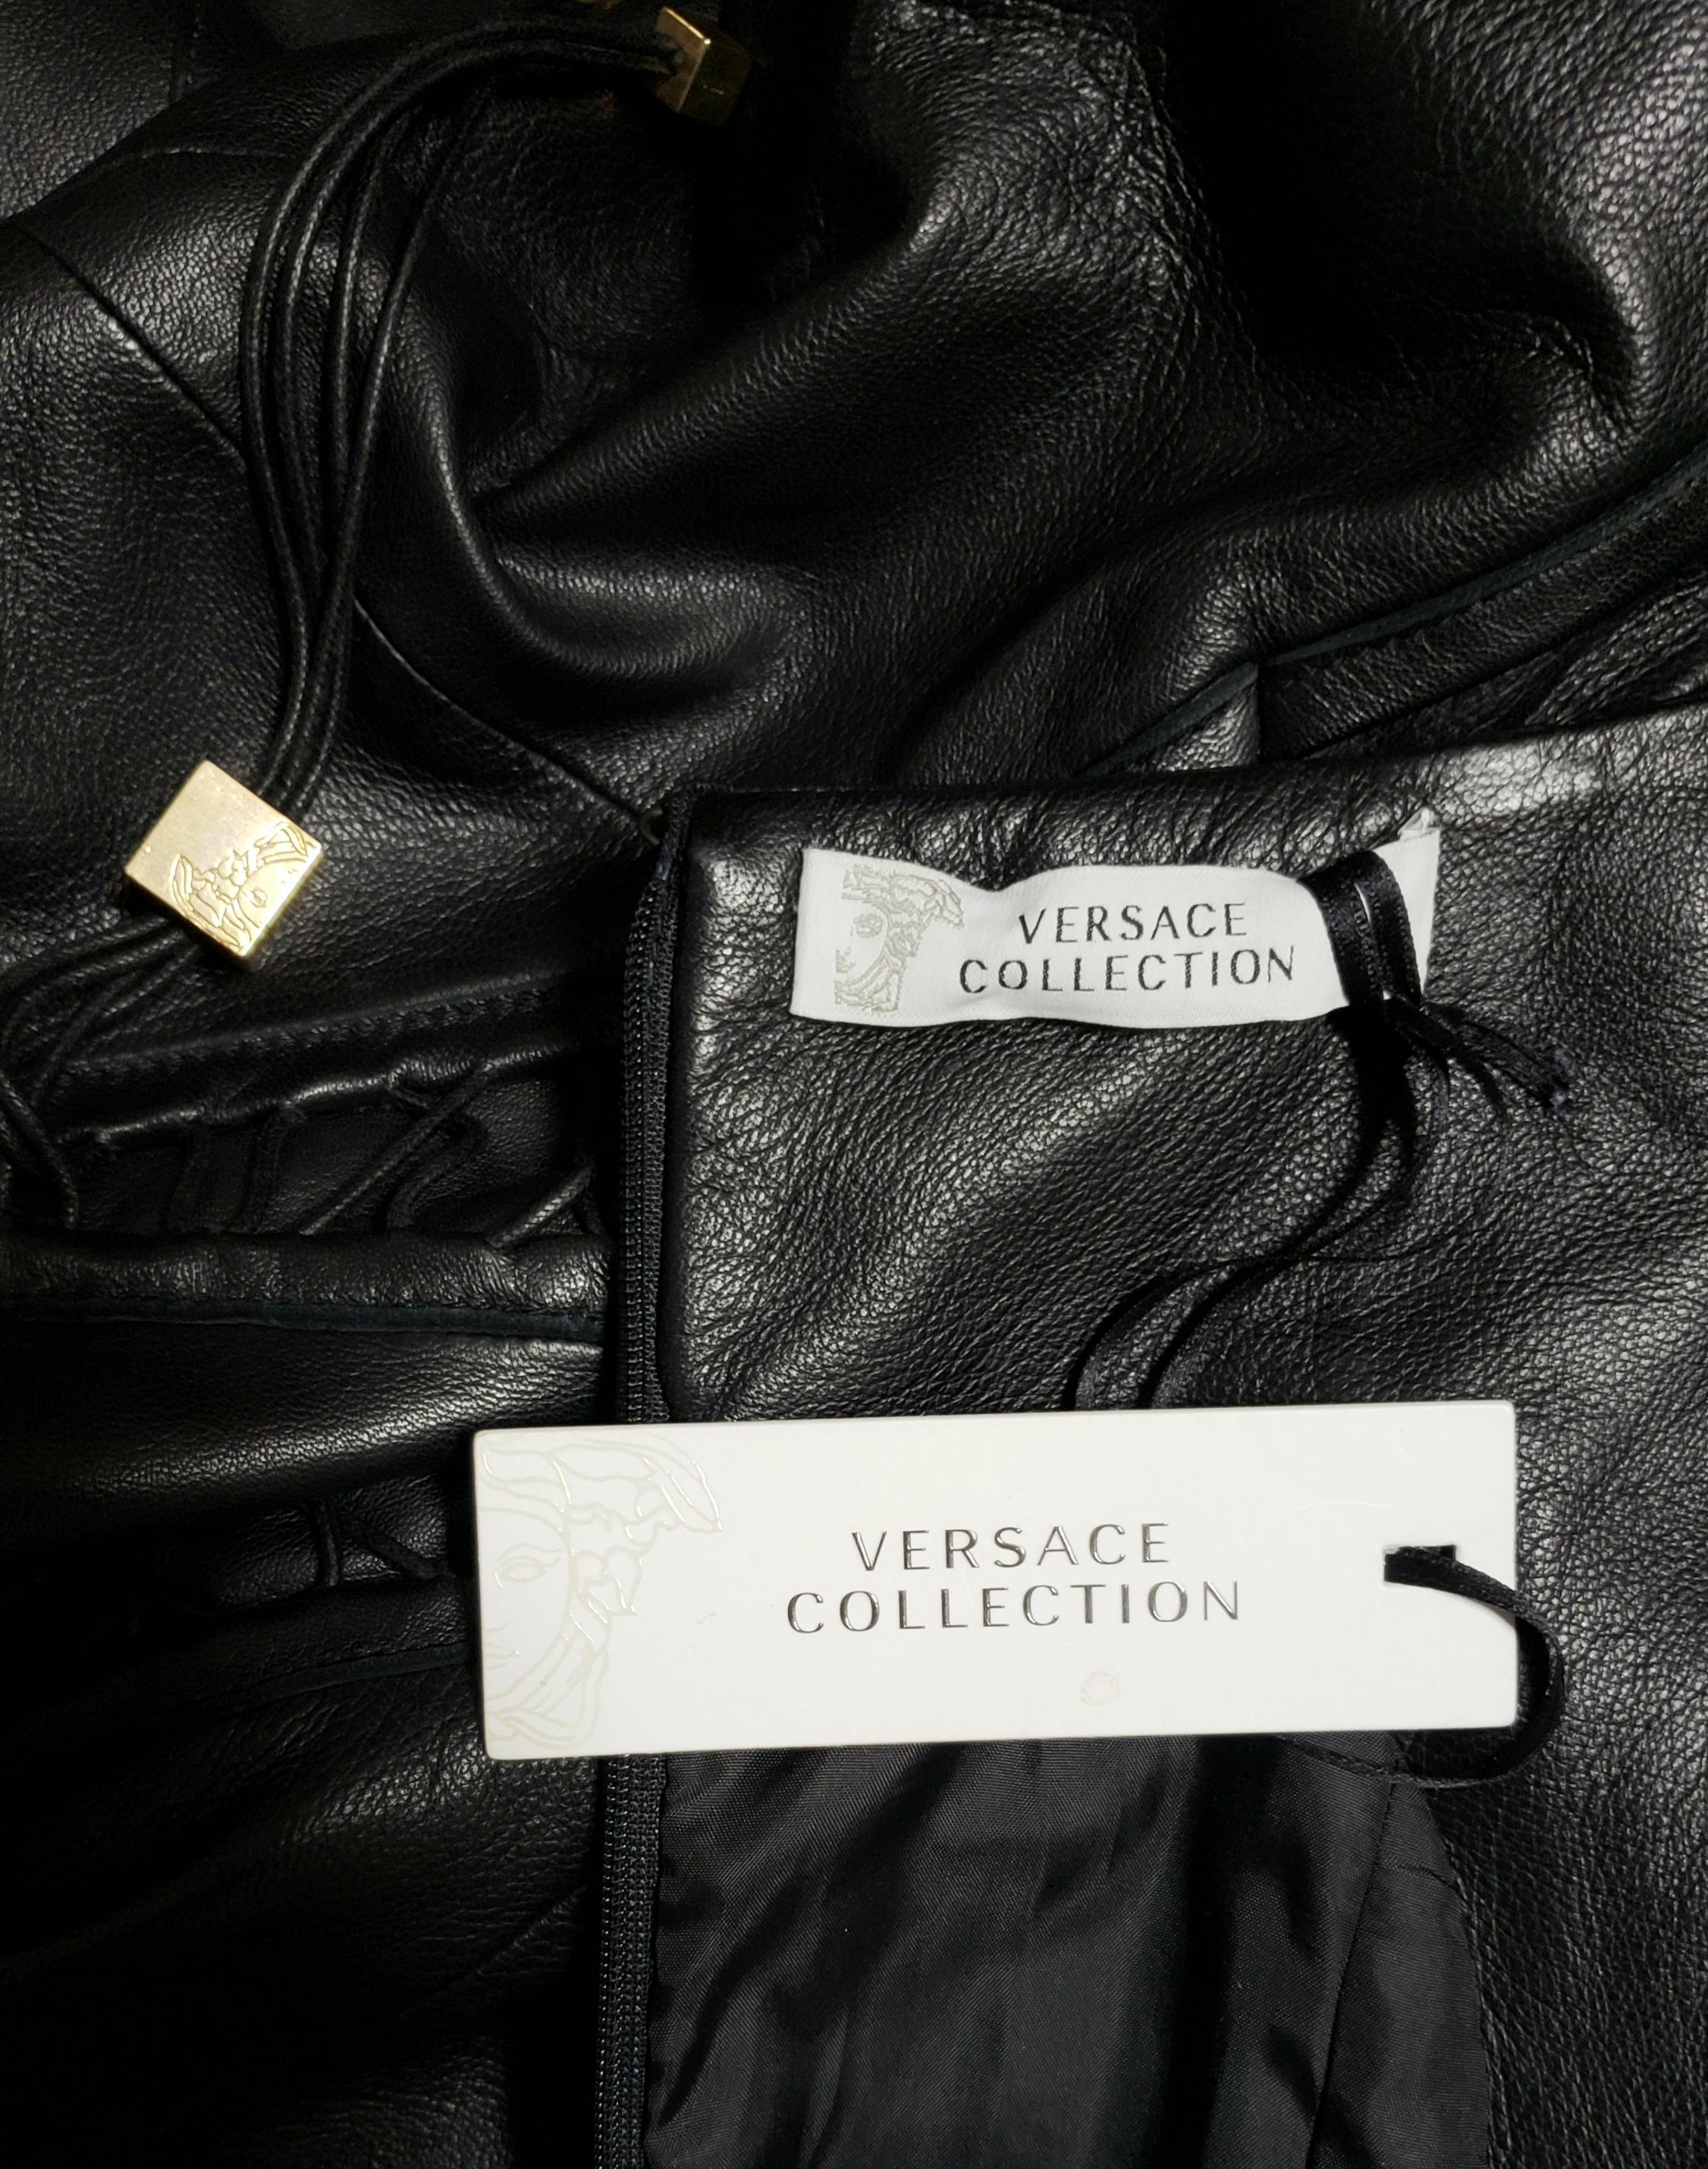 VERSACE COLLECTION BLACK LEATHER DRESS with TASSELS 38 - 4 3